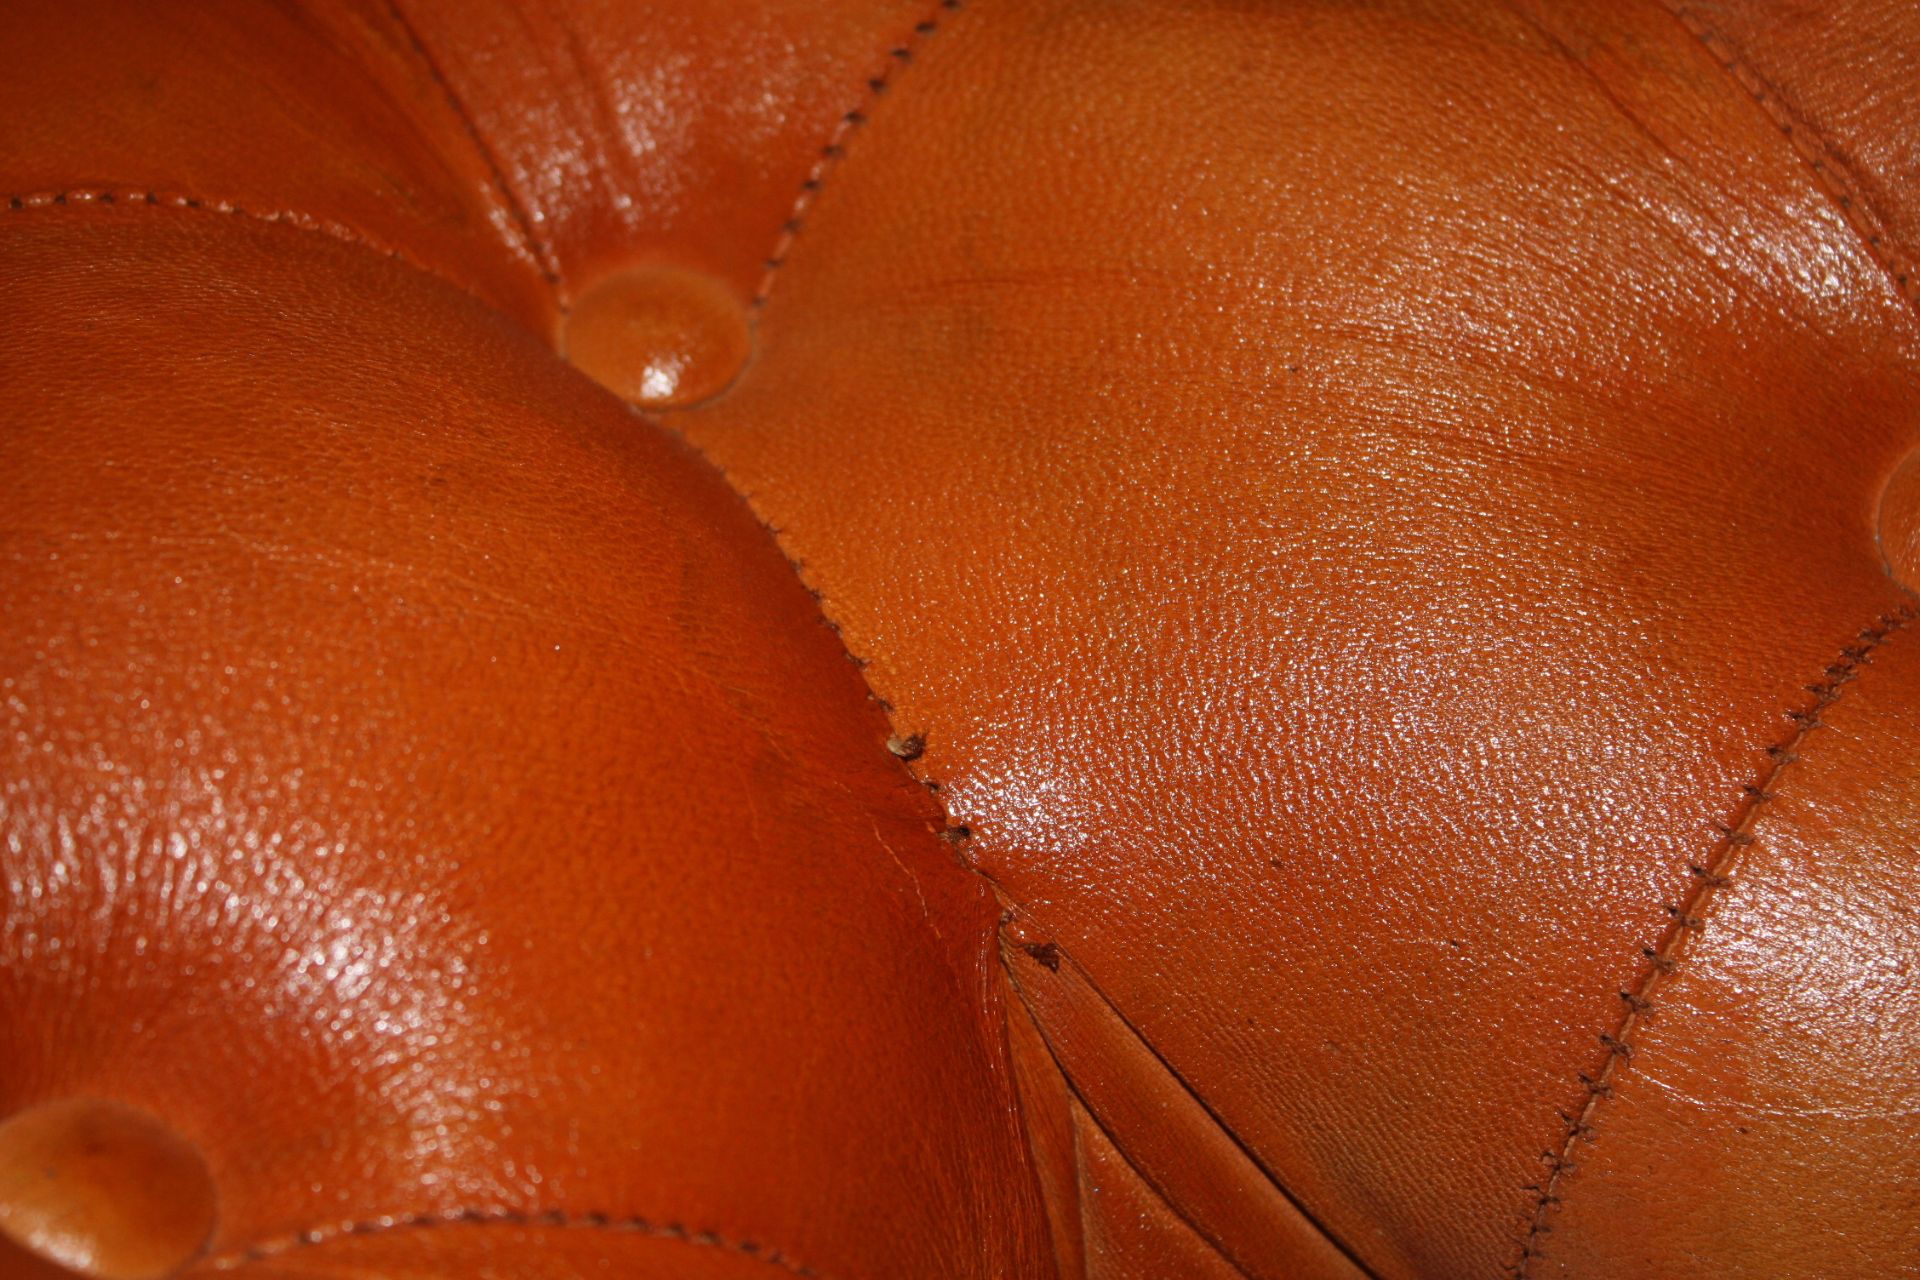 Shoreditch Low Back Leather Chesterfield Club Armchair In Tan Handmade Shoreditch leather - Image 6 of 6